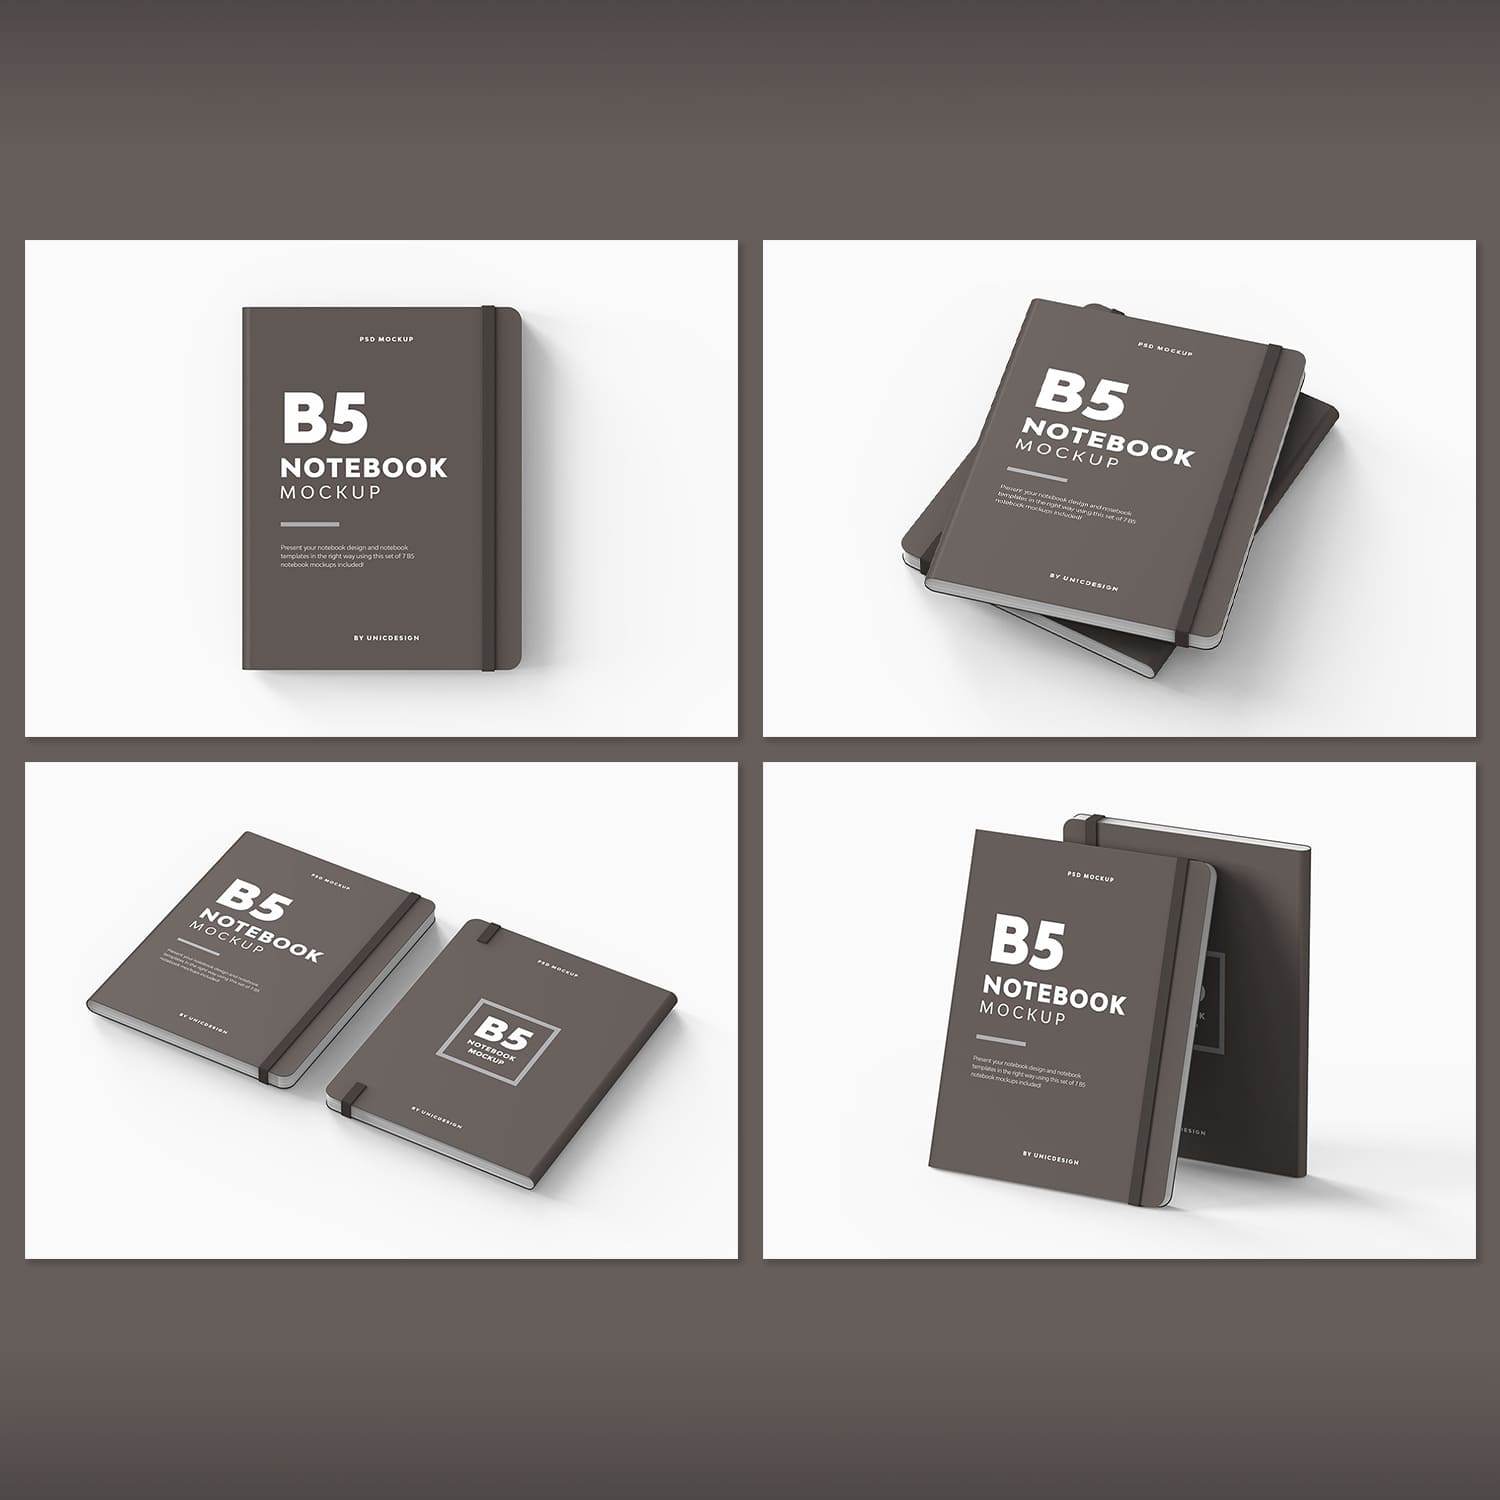 A set of b5 notebook images with great designs.